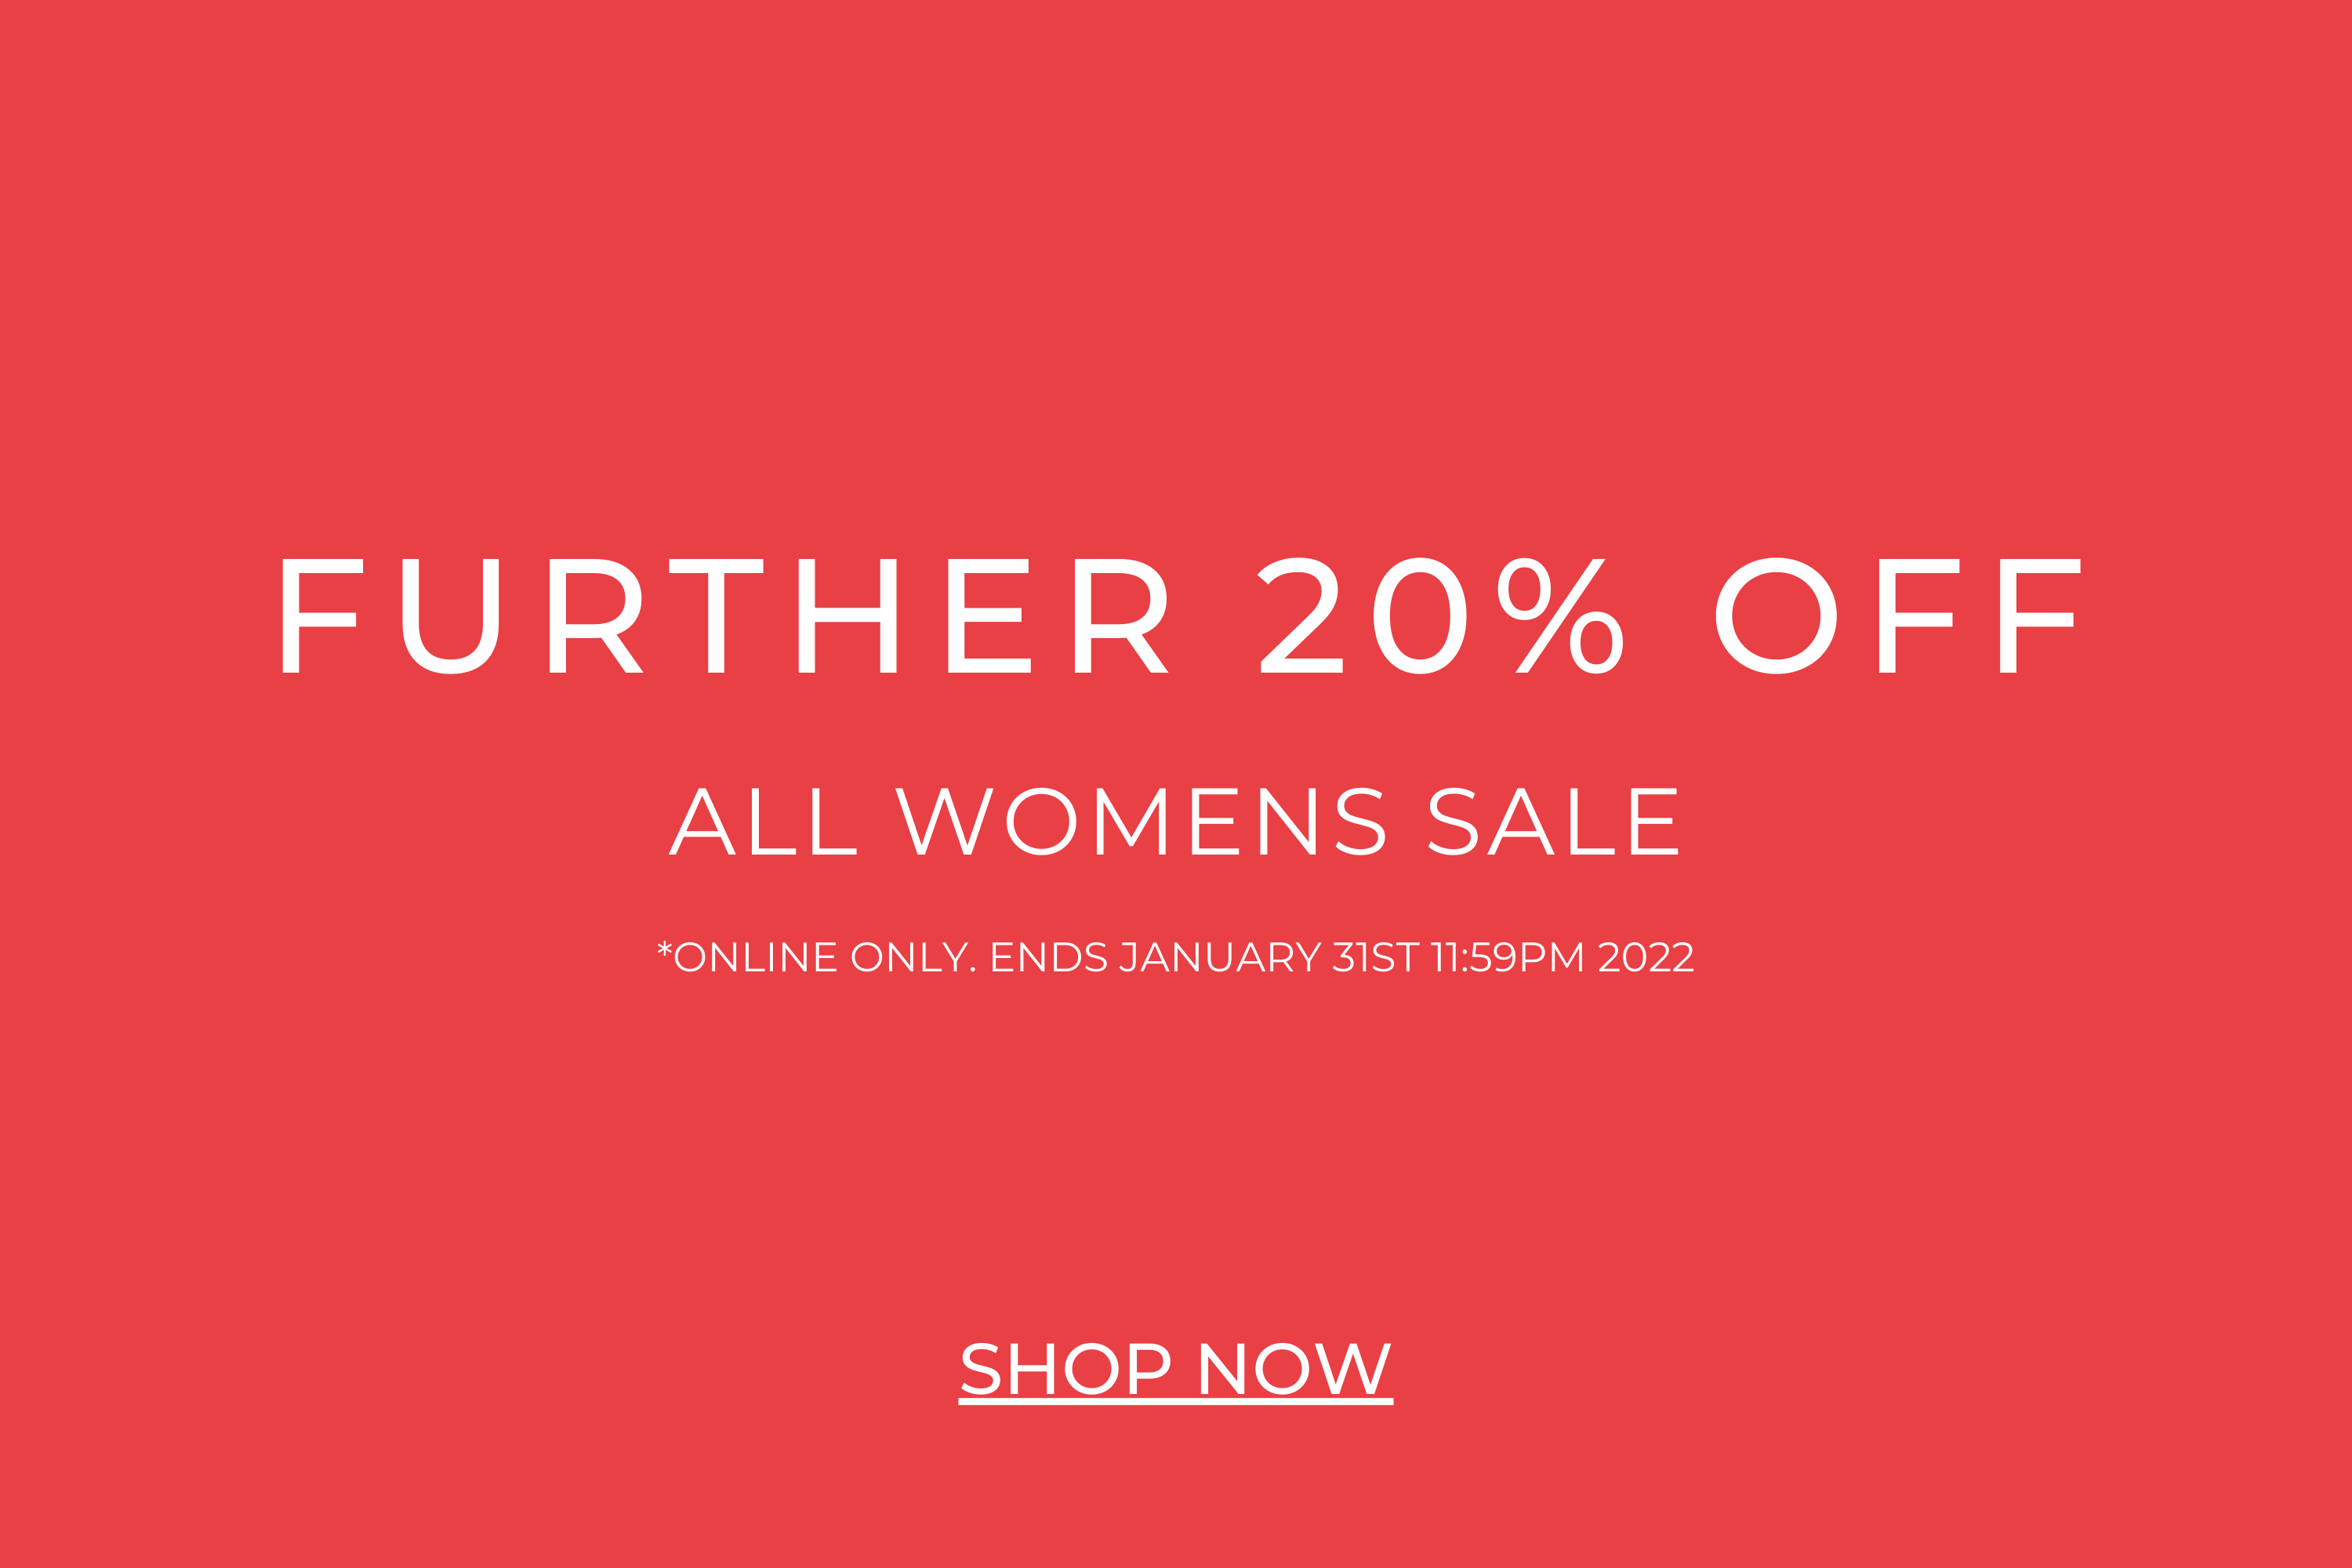 Further 20% off all womens sale | Online only. Ends January 31st 11:59pm 2022 | Shop Now